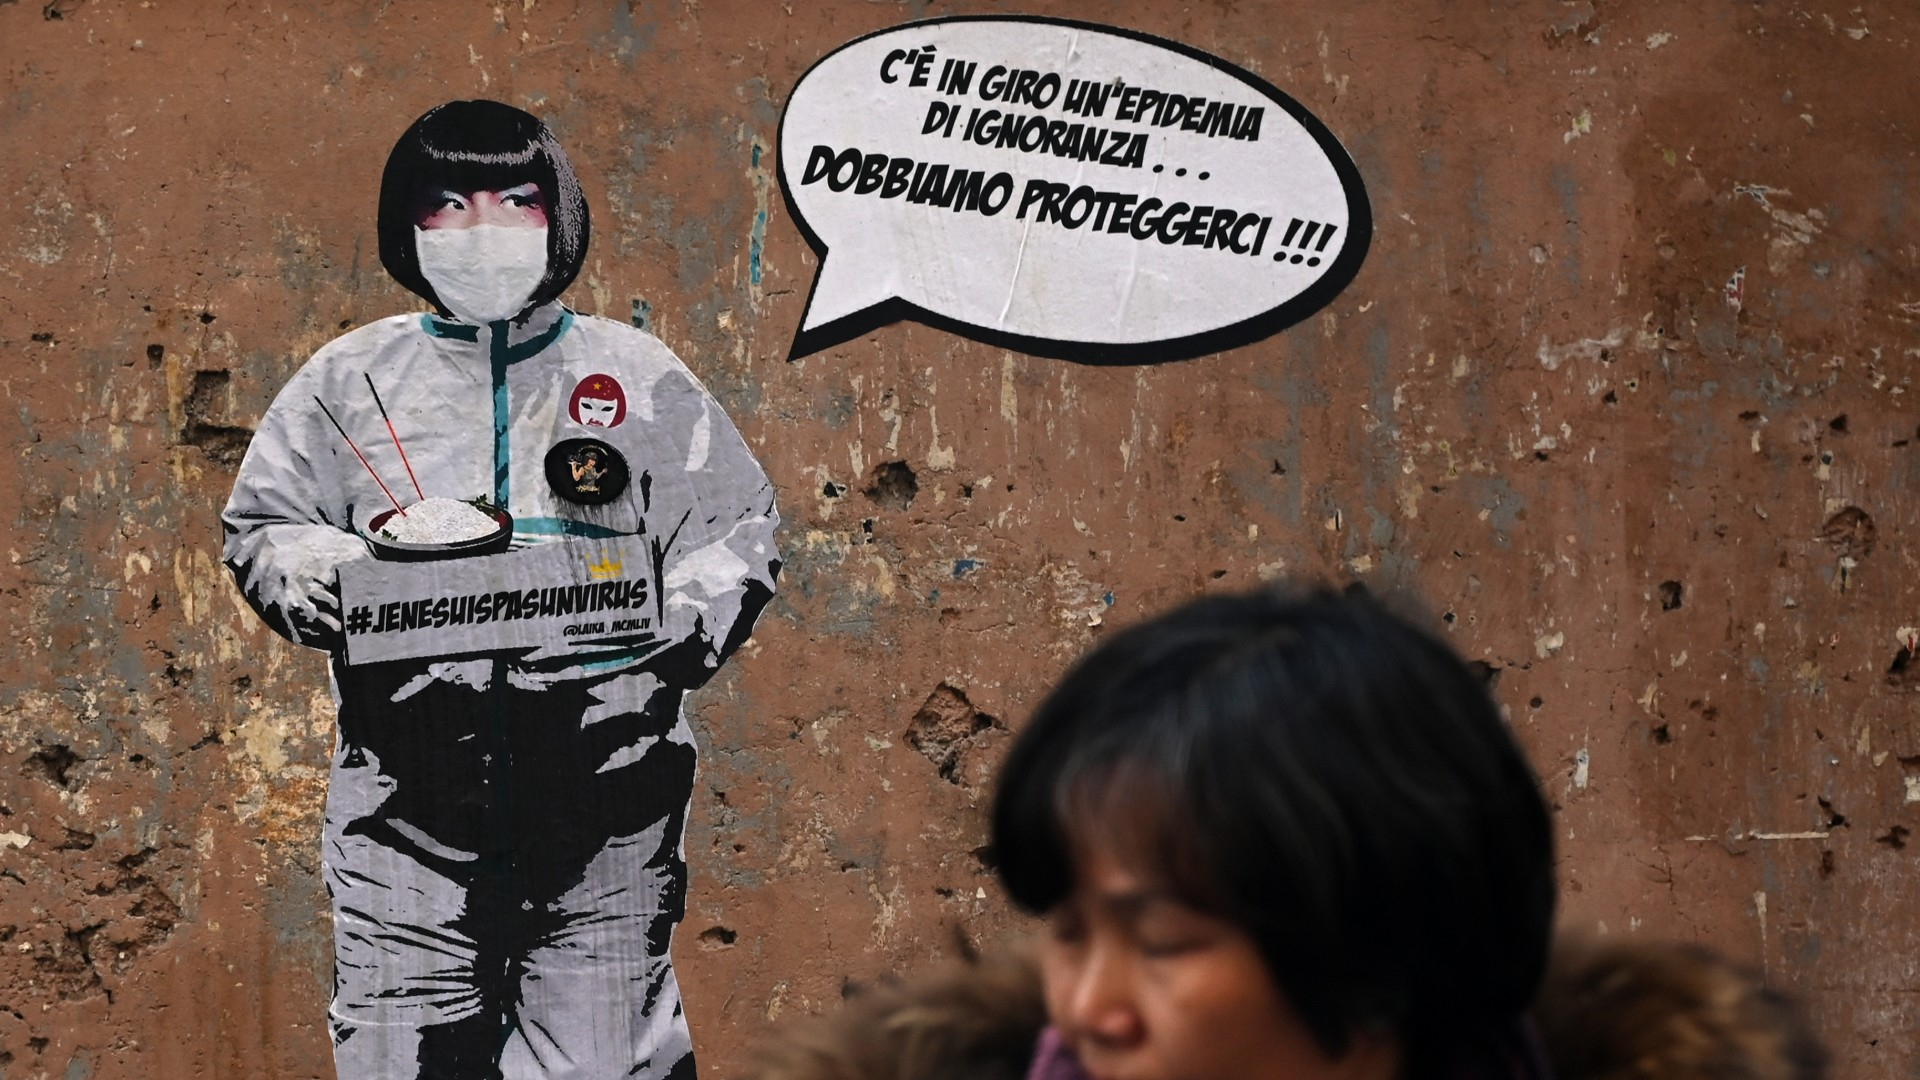 'An epidemic of ignorance is around – we must protect ourselves' says a mural by street artist Laika near Rome's Chinatown. /Filippo Monteforte/AFP